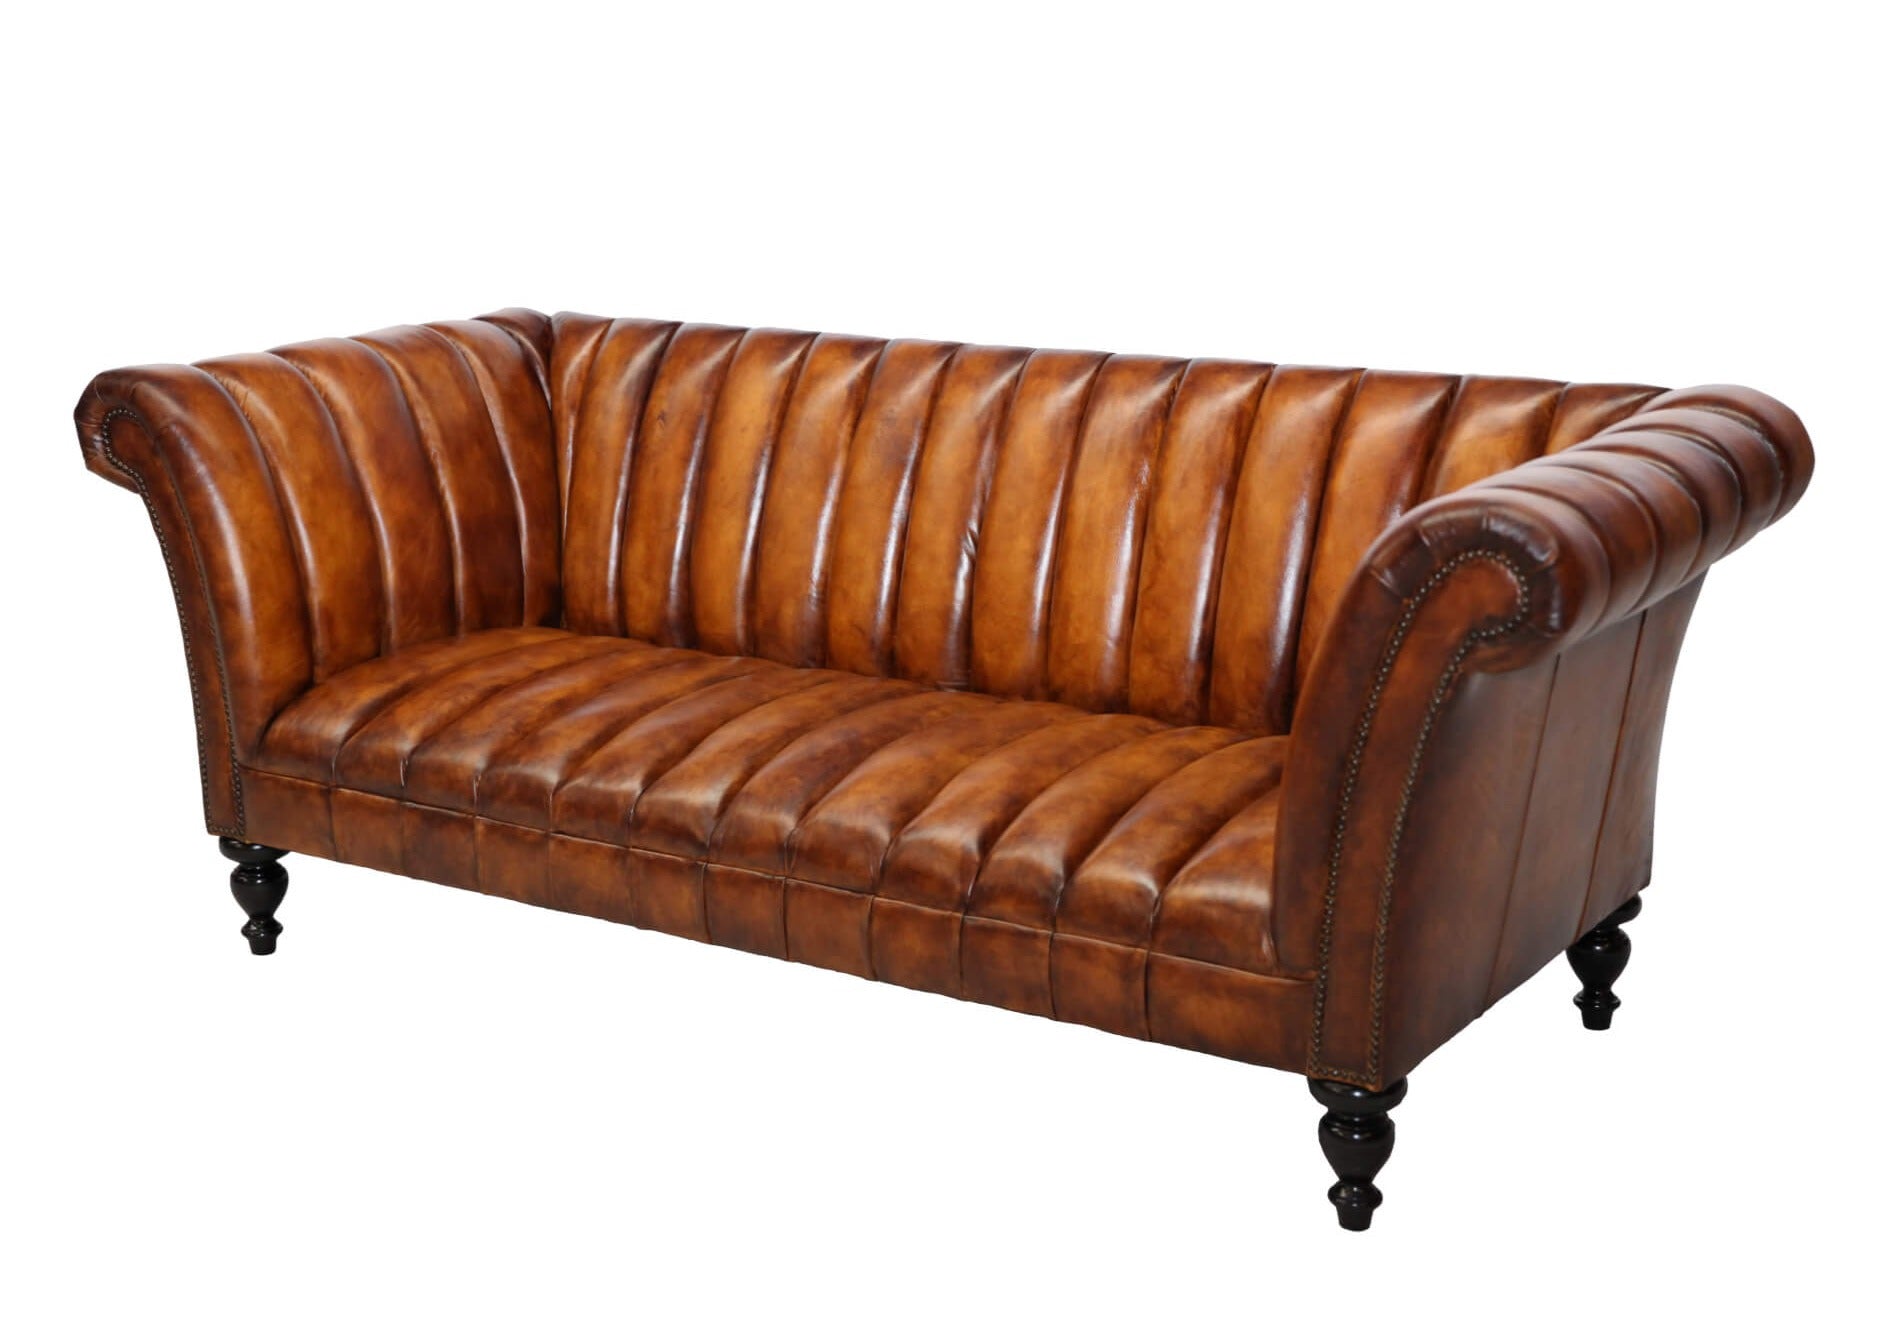 Classic Style Channeled Sofa